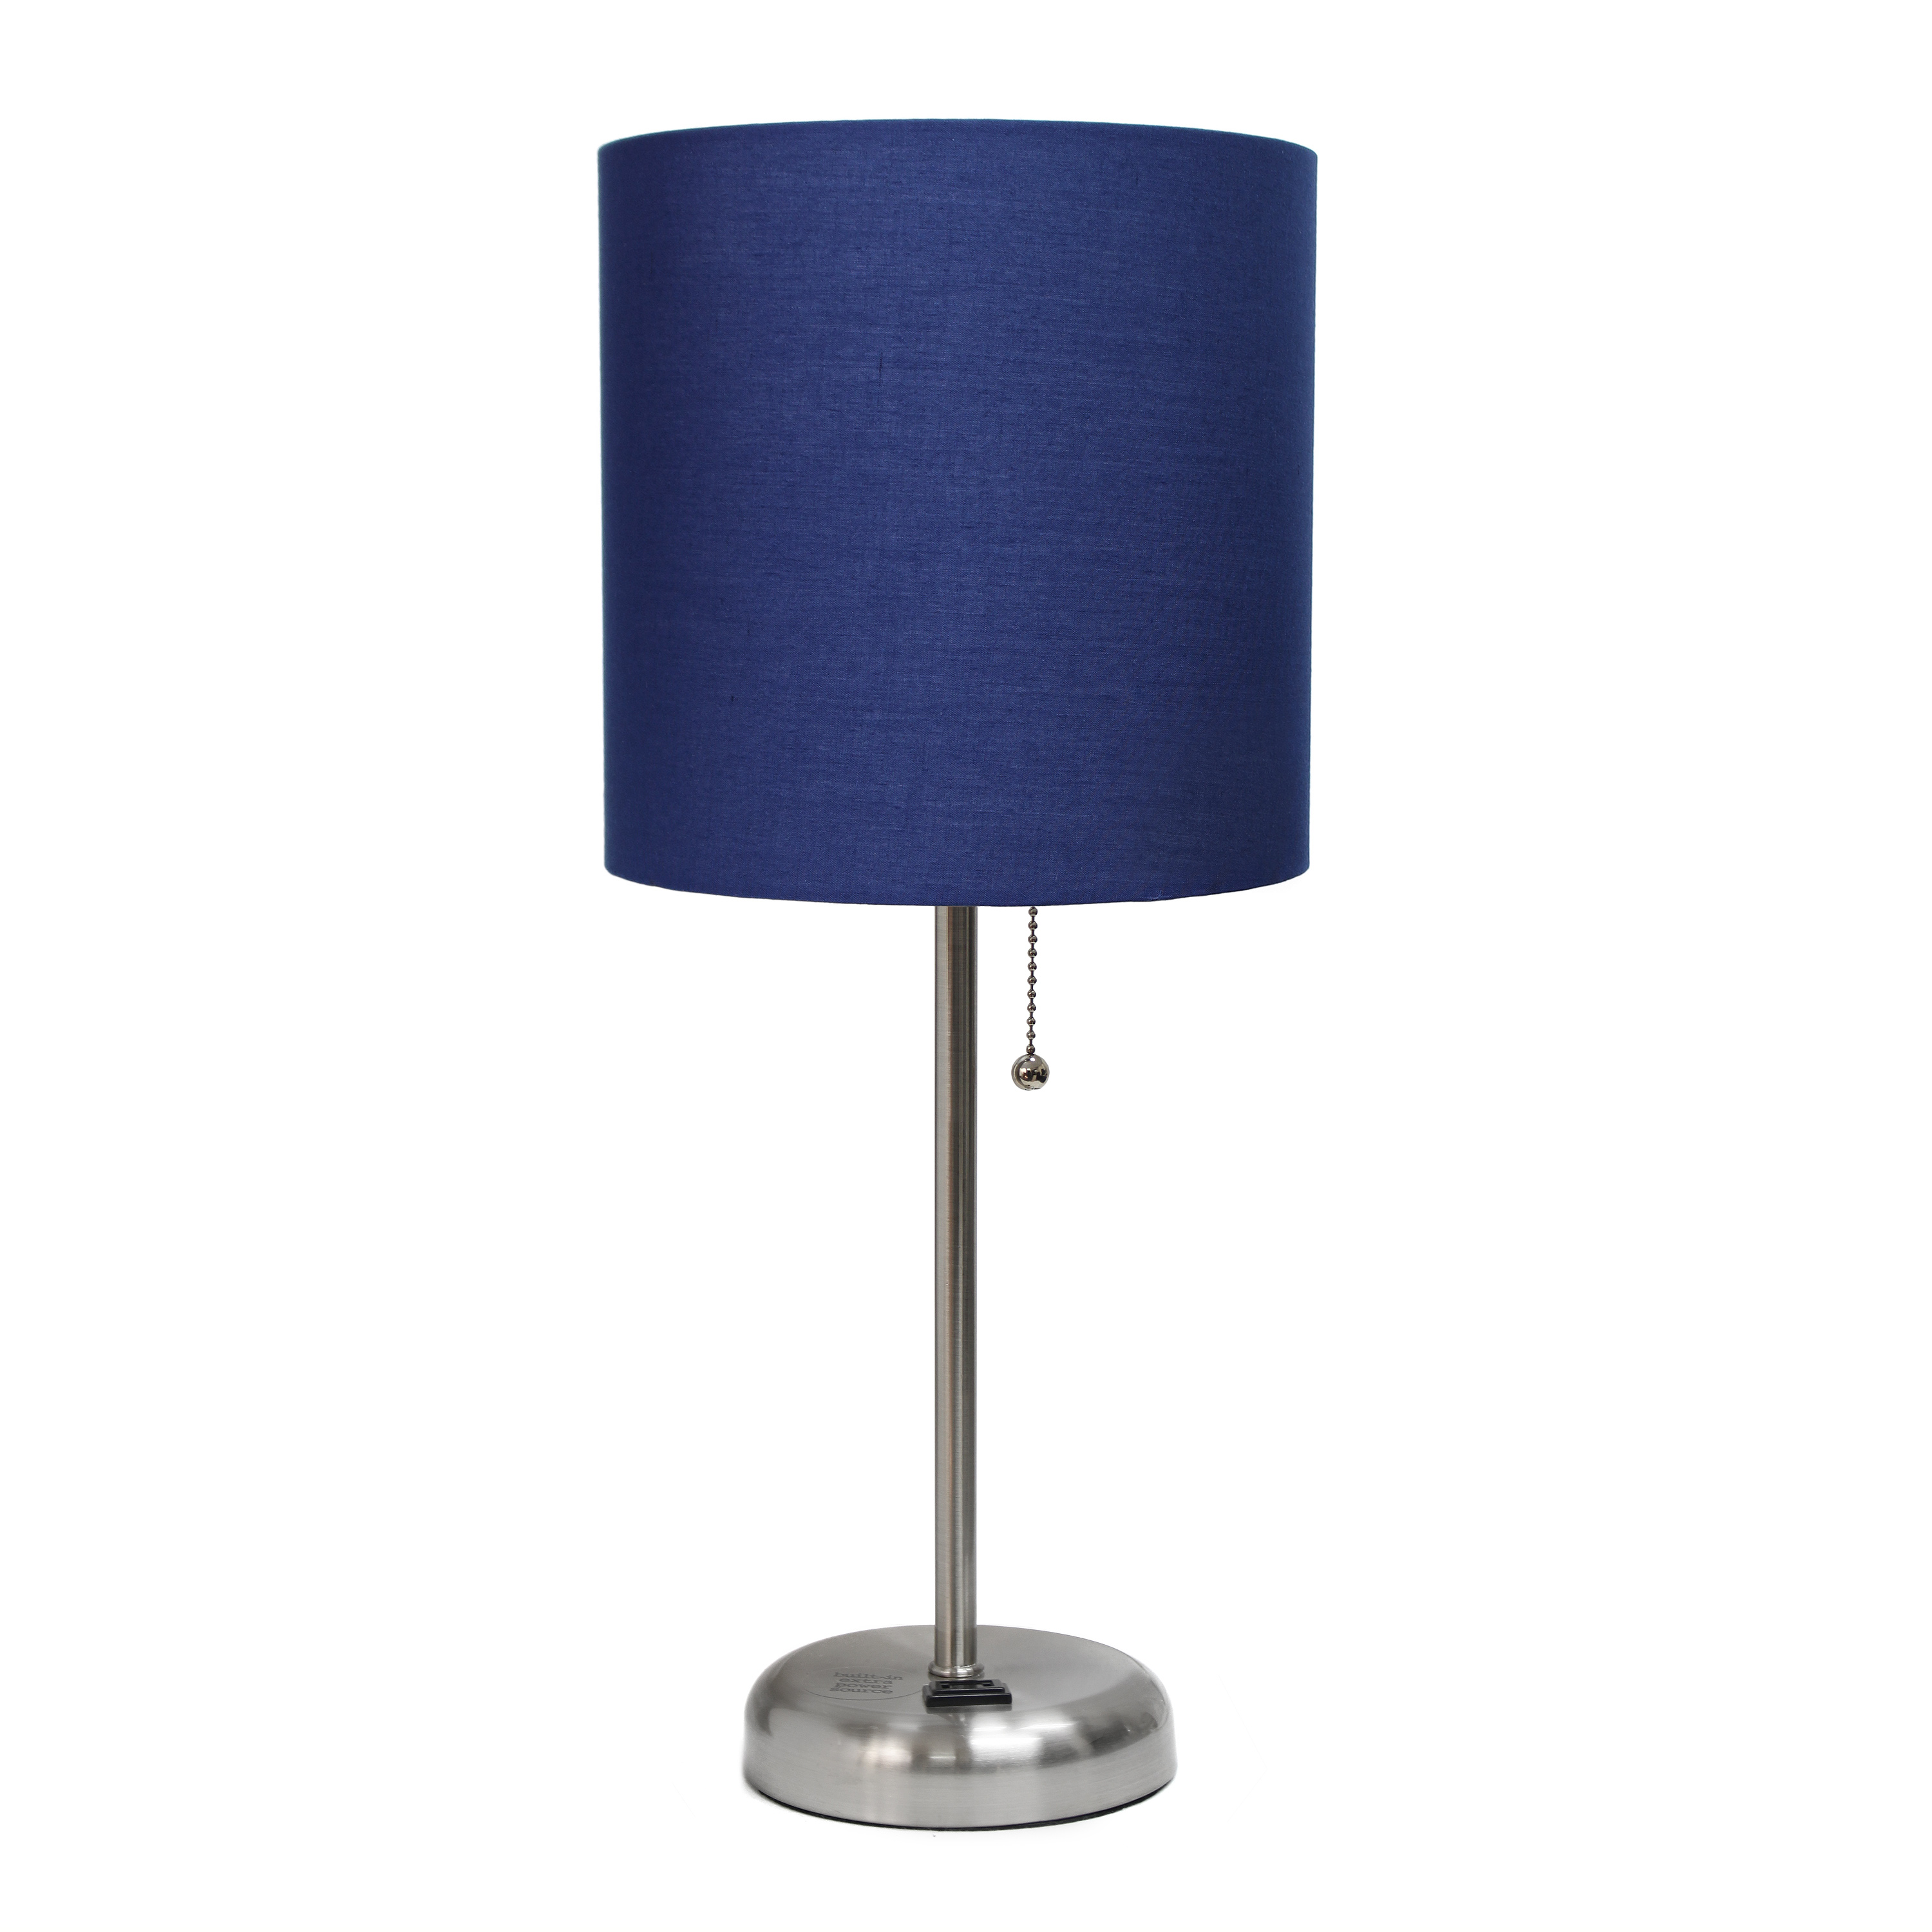 LimeLights Stick Lamp with Charging Outlet and Fabric Shade, Navy